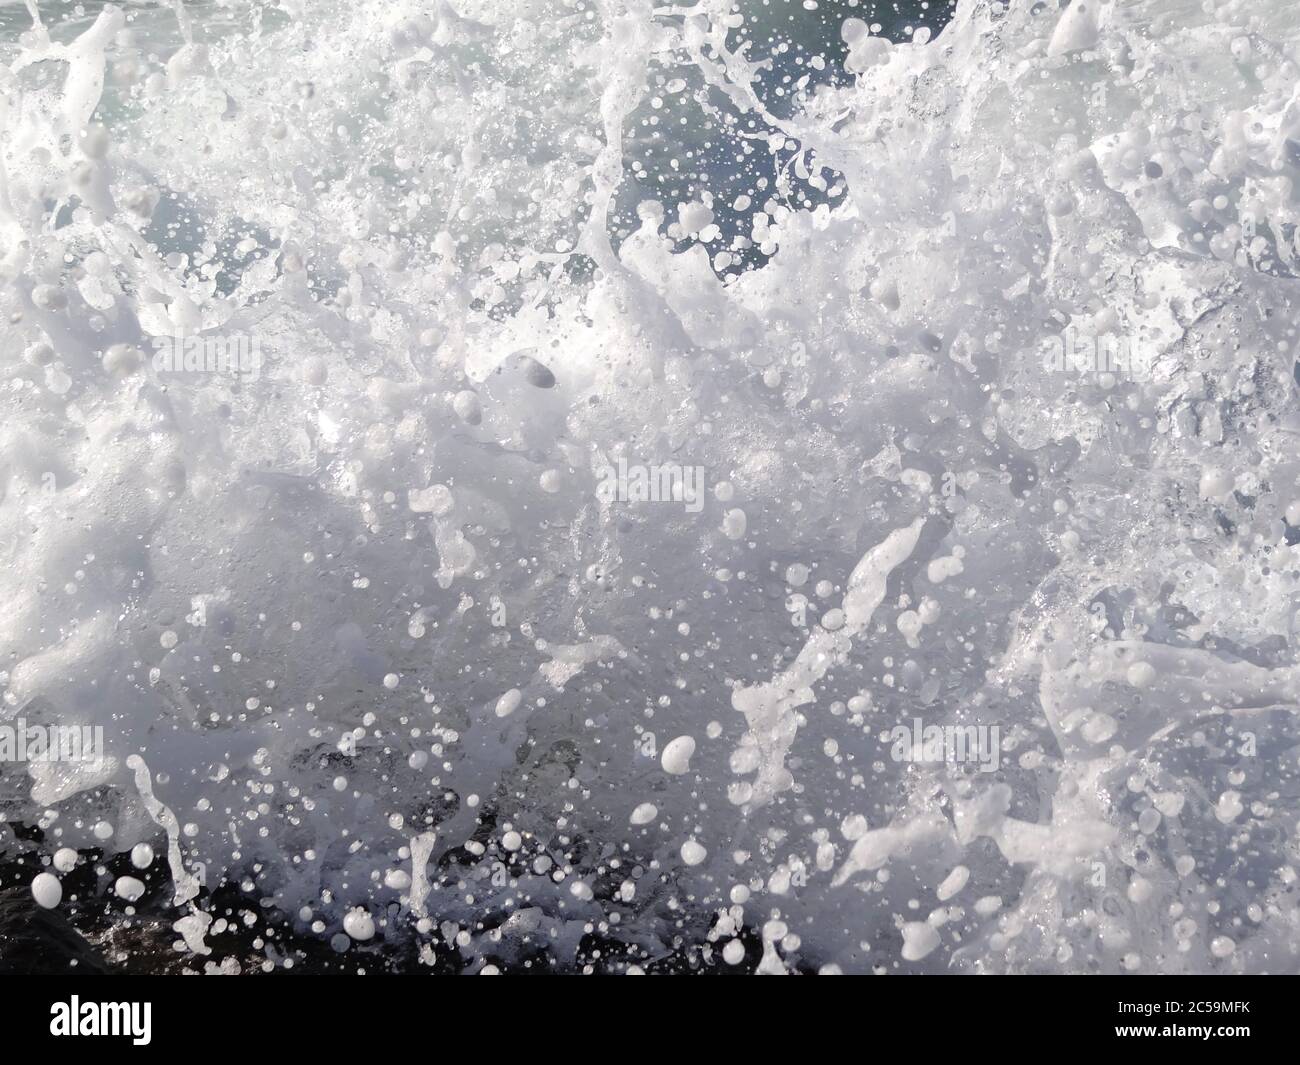 A splash of sea wave on the beach, close up details Stock Photo